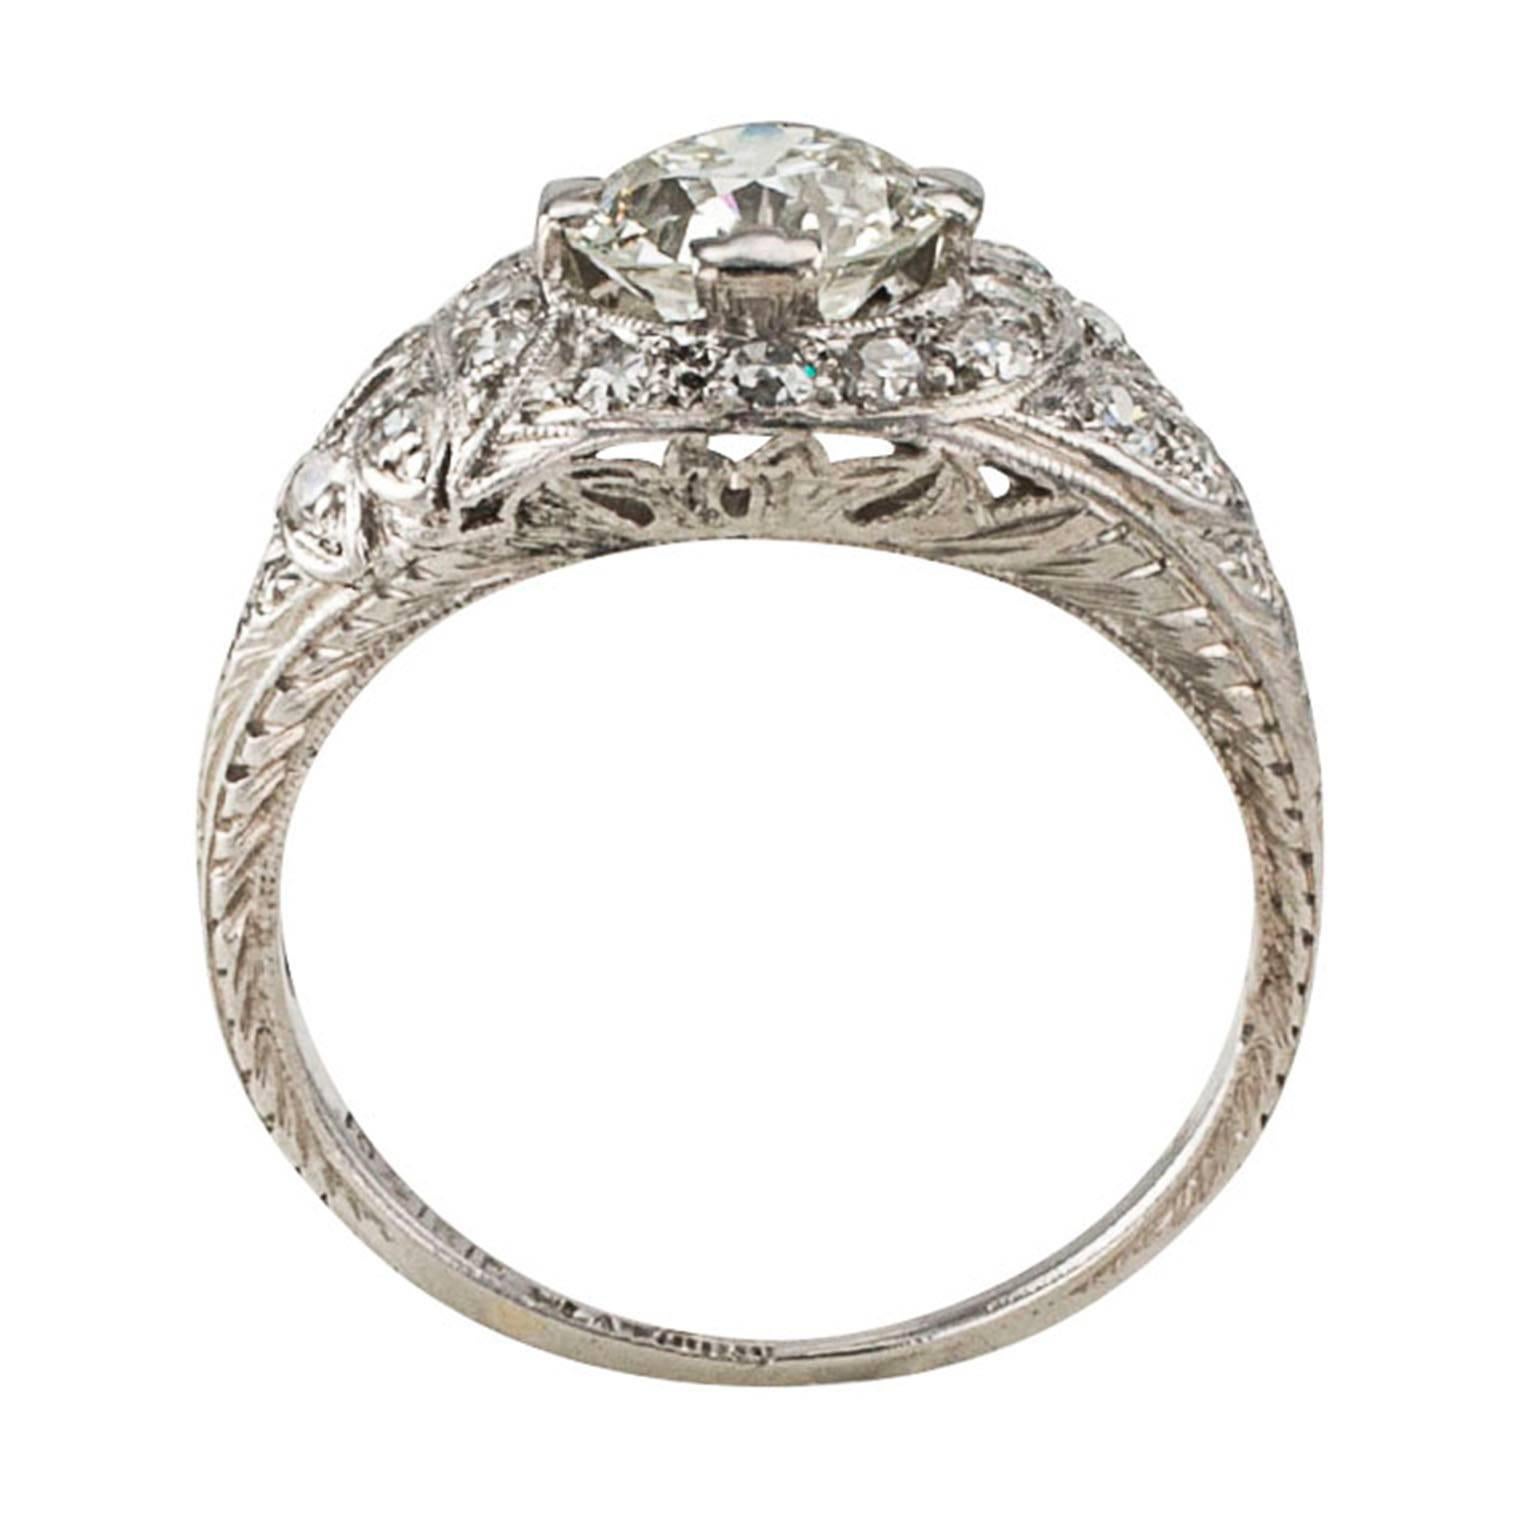 1.03 Carats G VVS2 Art Deco Engagement Ring

This pretty original Art Deco engagement ring showcases an old European-cut diamond weighing 1.03 carats, accompanied by a report from EGL-USA stating that the diamond is G color and VVS2 clarity,